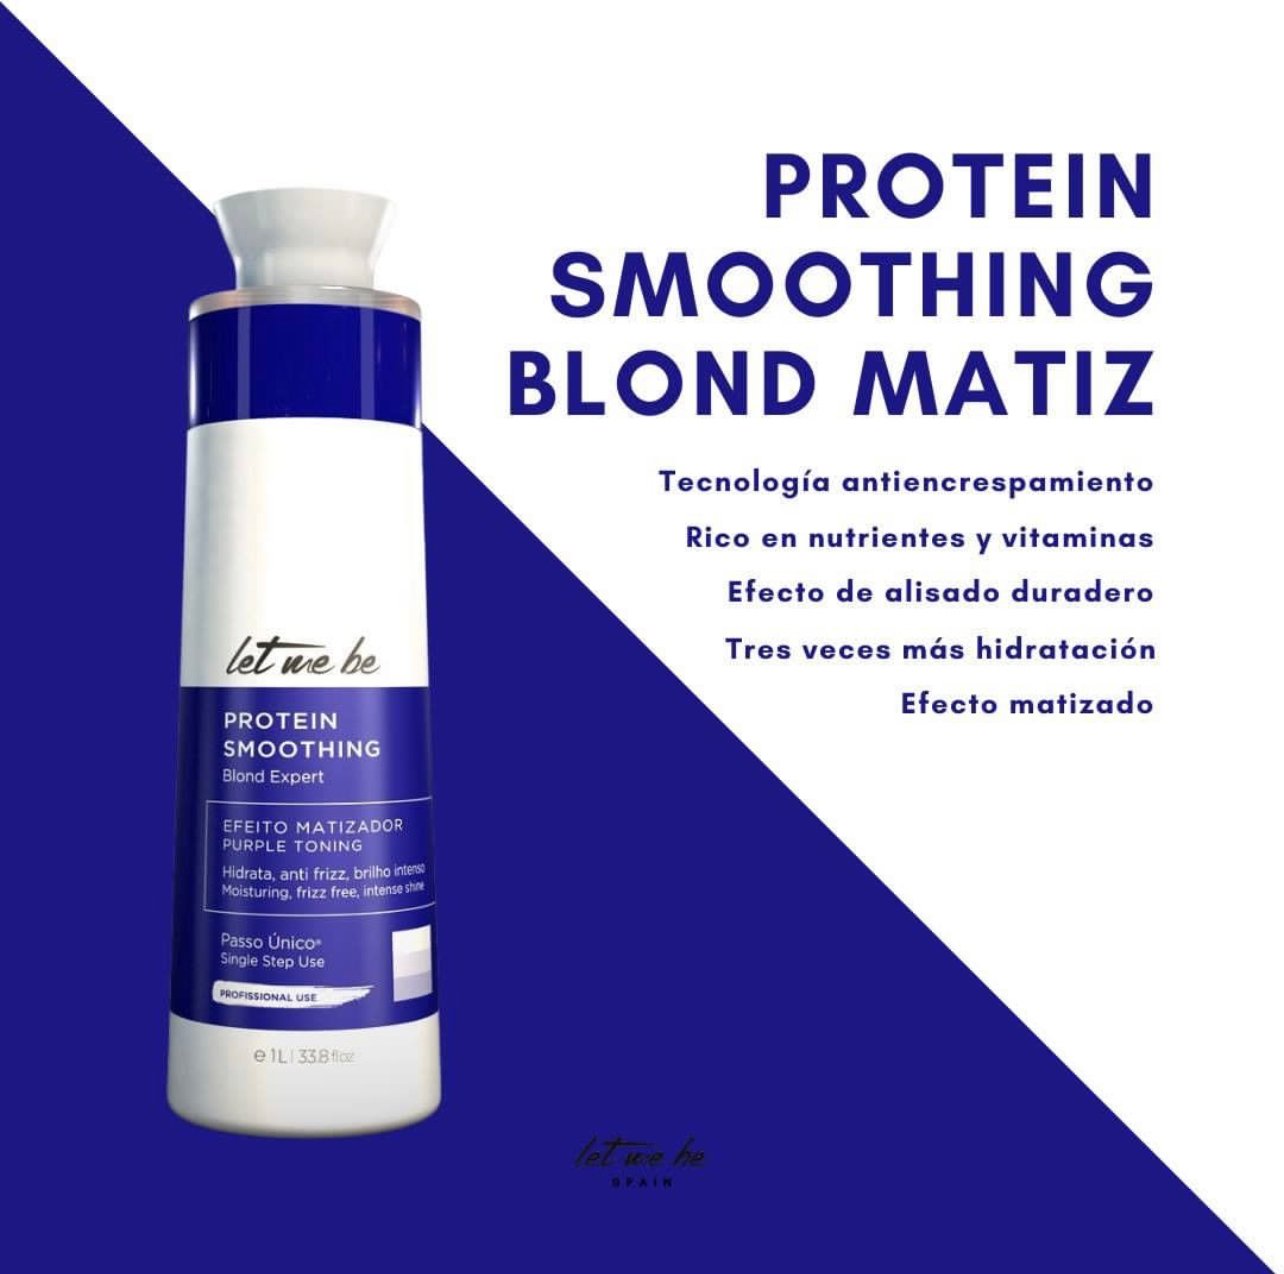 prothein smoothing blond matiz let me be